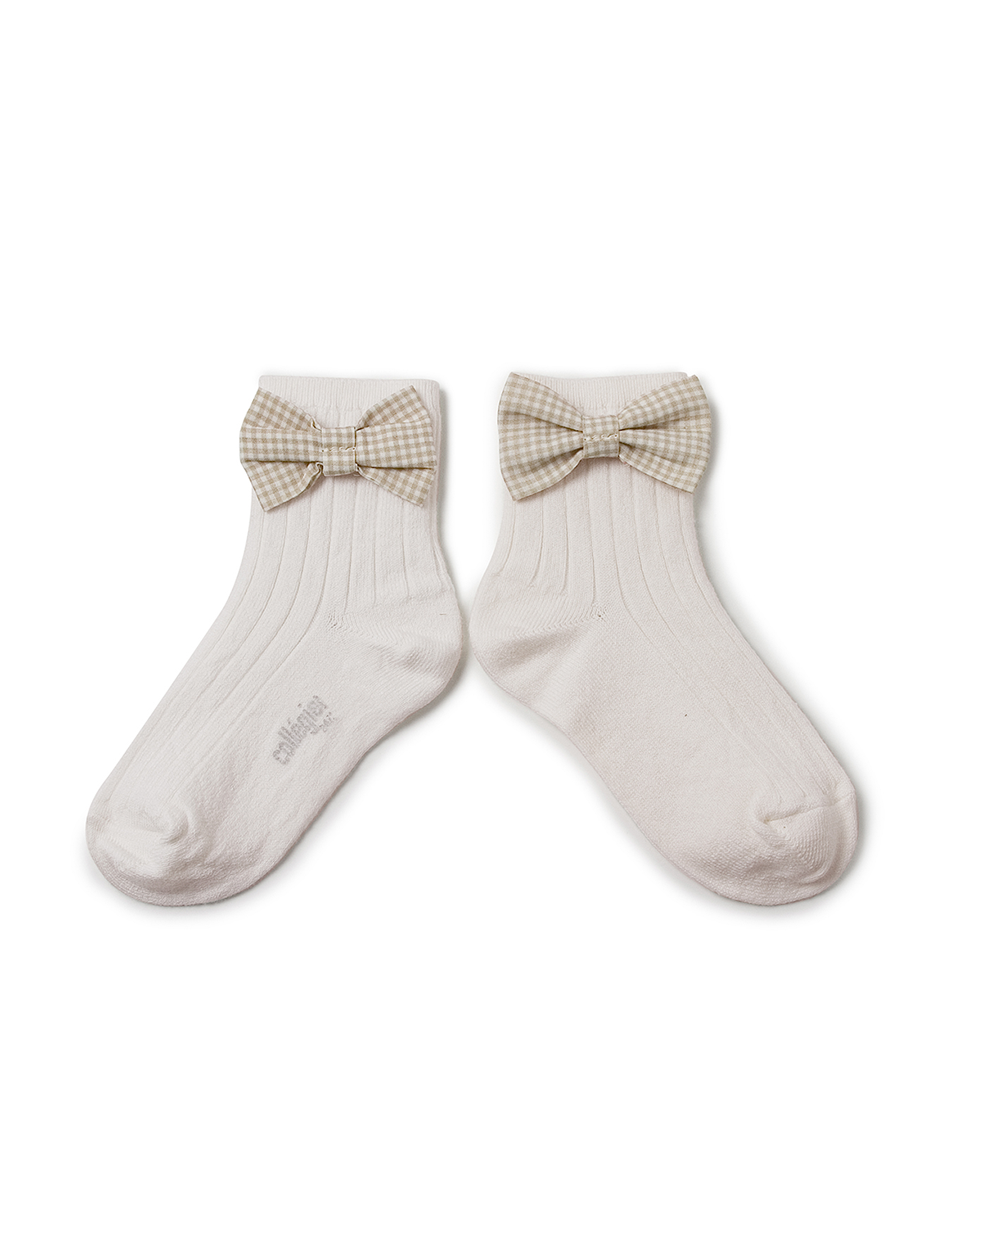 [Collégien] Colette - Ribbed Ankle Socks with Gingham bow - Blanc Neige [28-31]